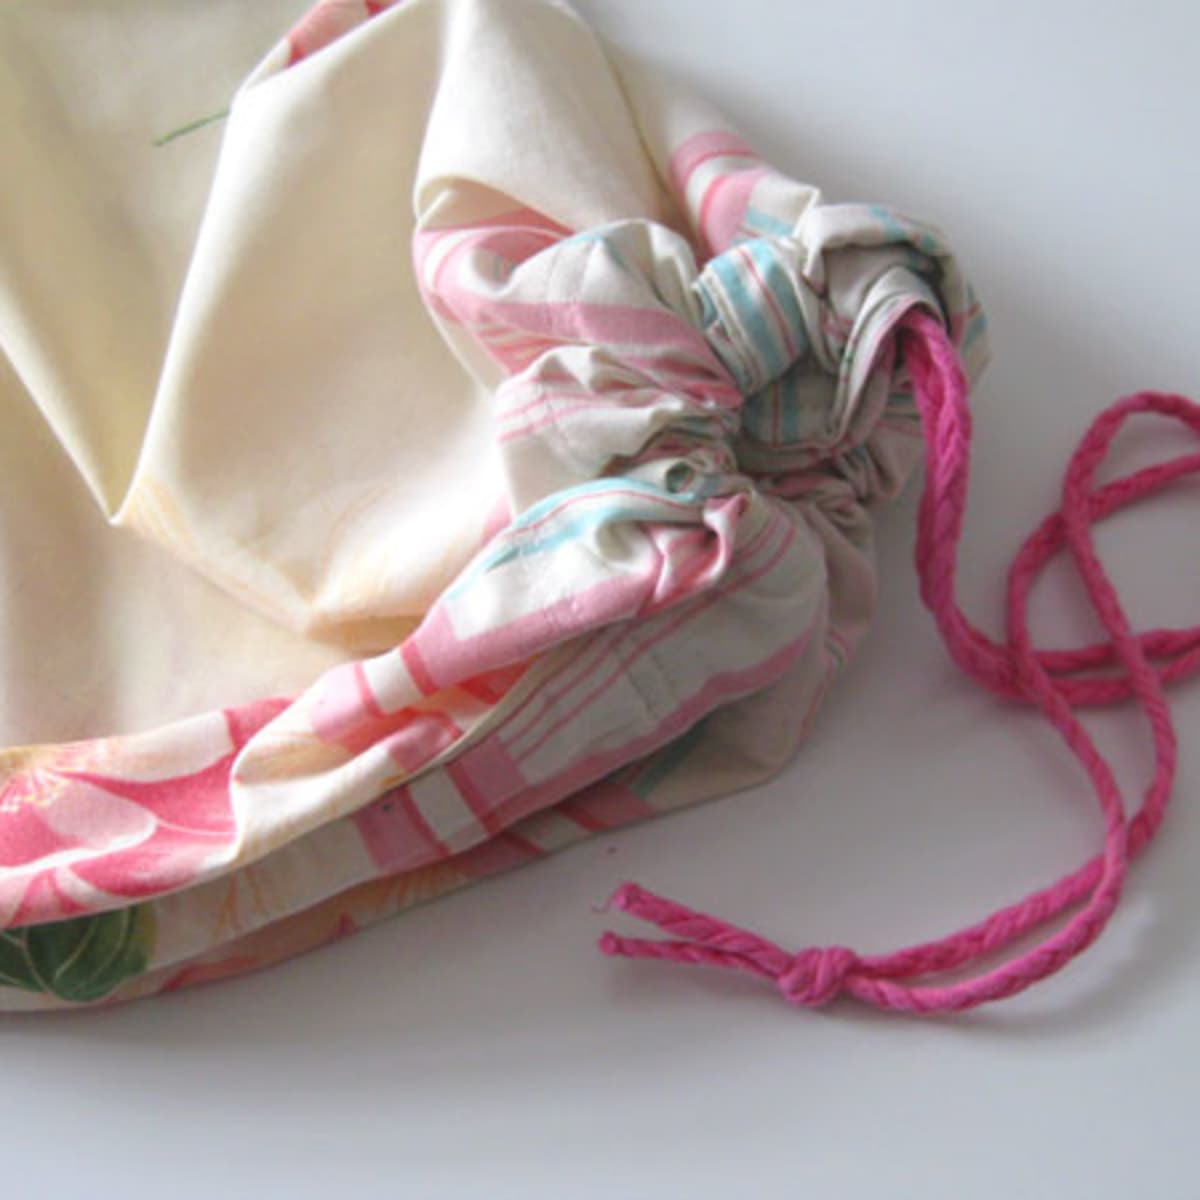 How to Make a Bra-Laundering Bag From an Old Pillowcase - FeltMagnet